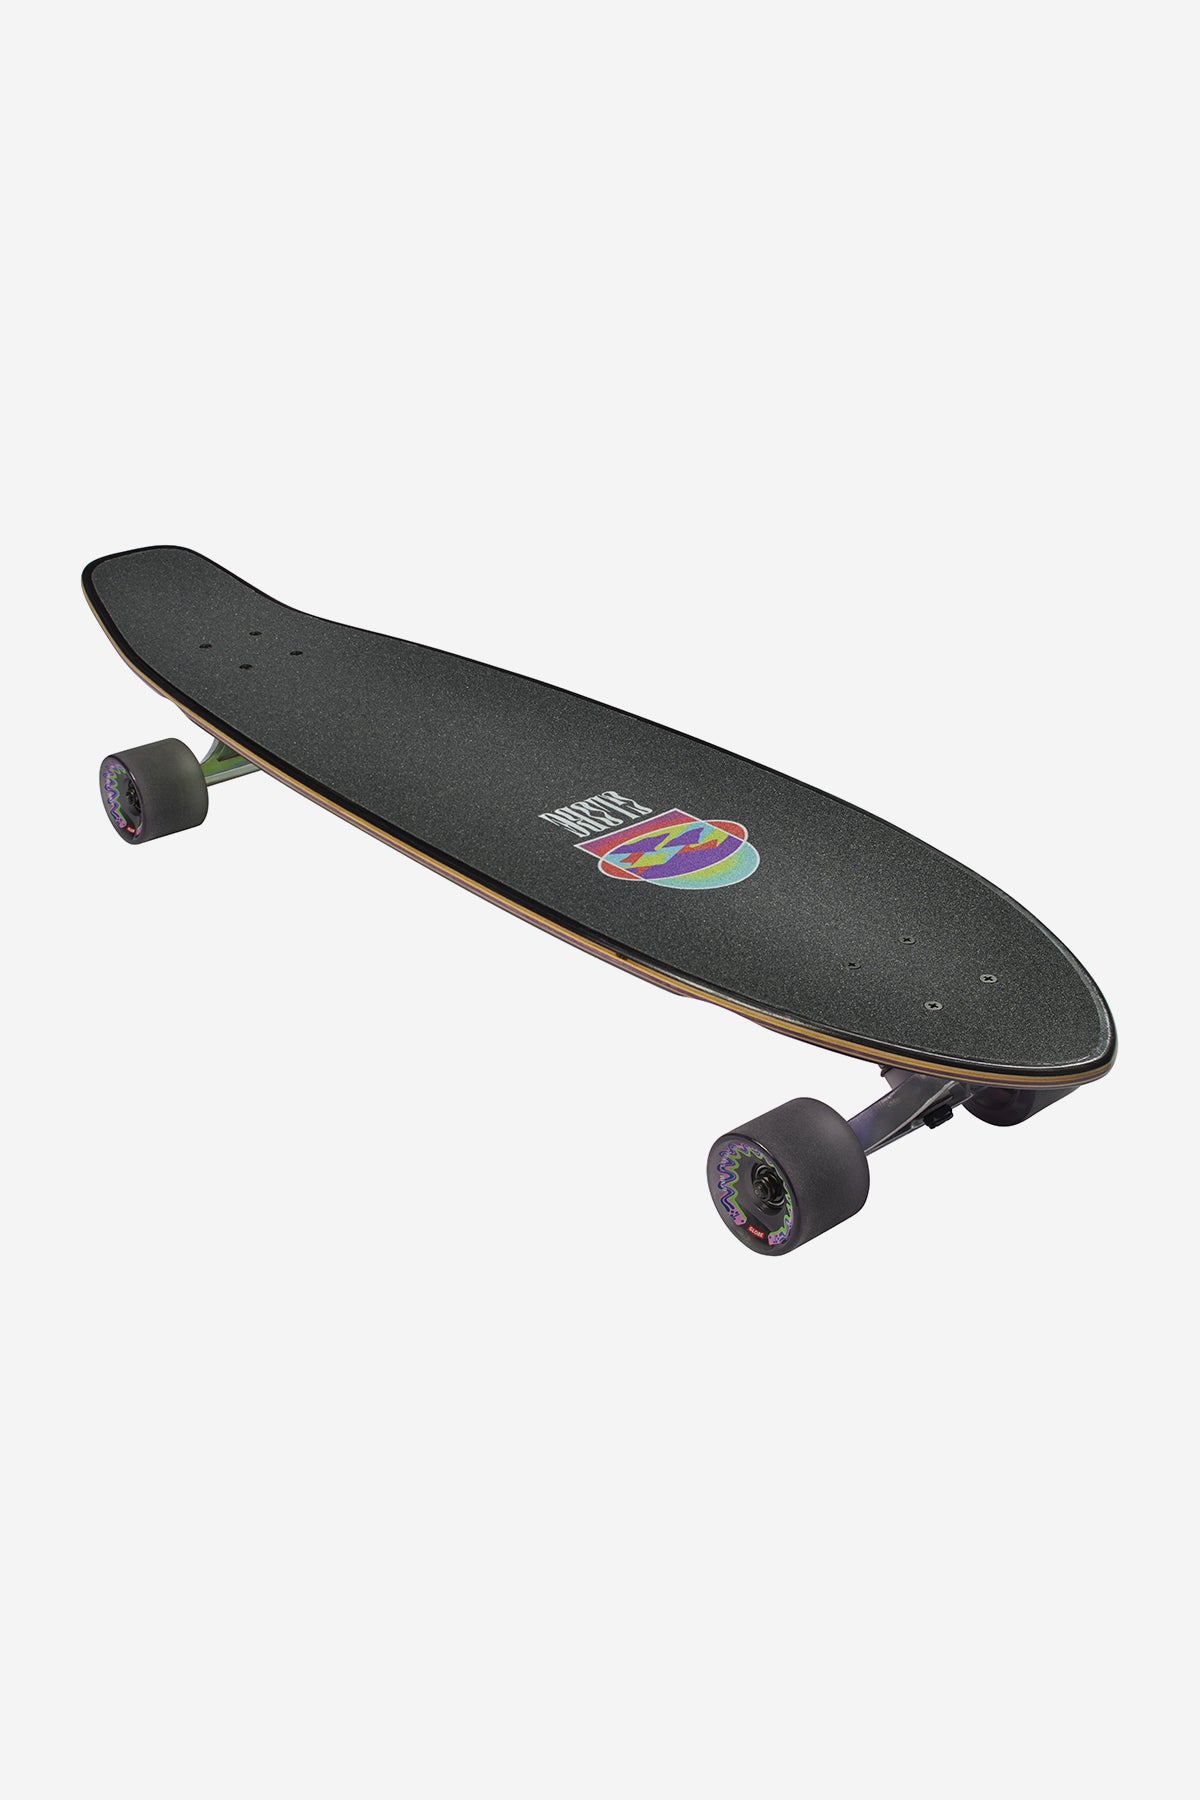 the all-time sharps on the brain 35" longboard